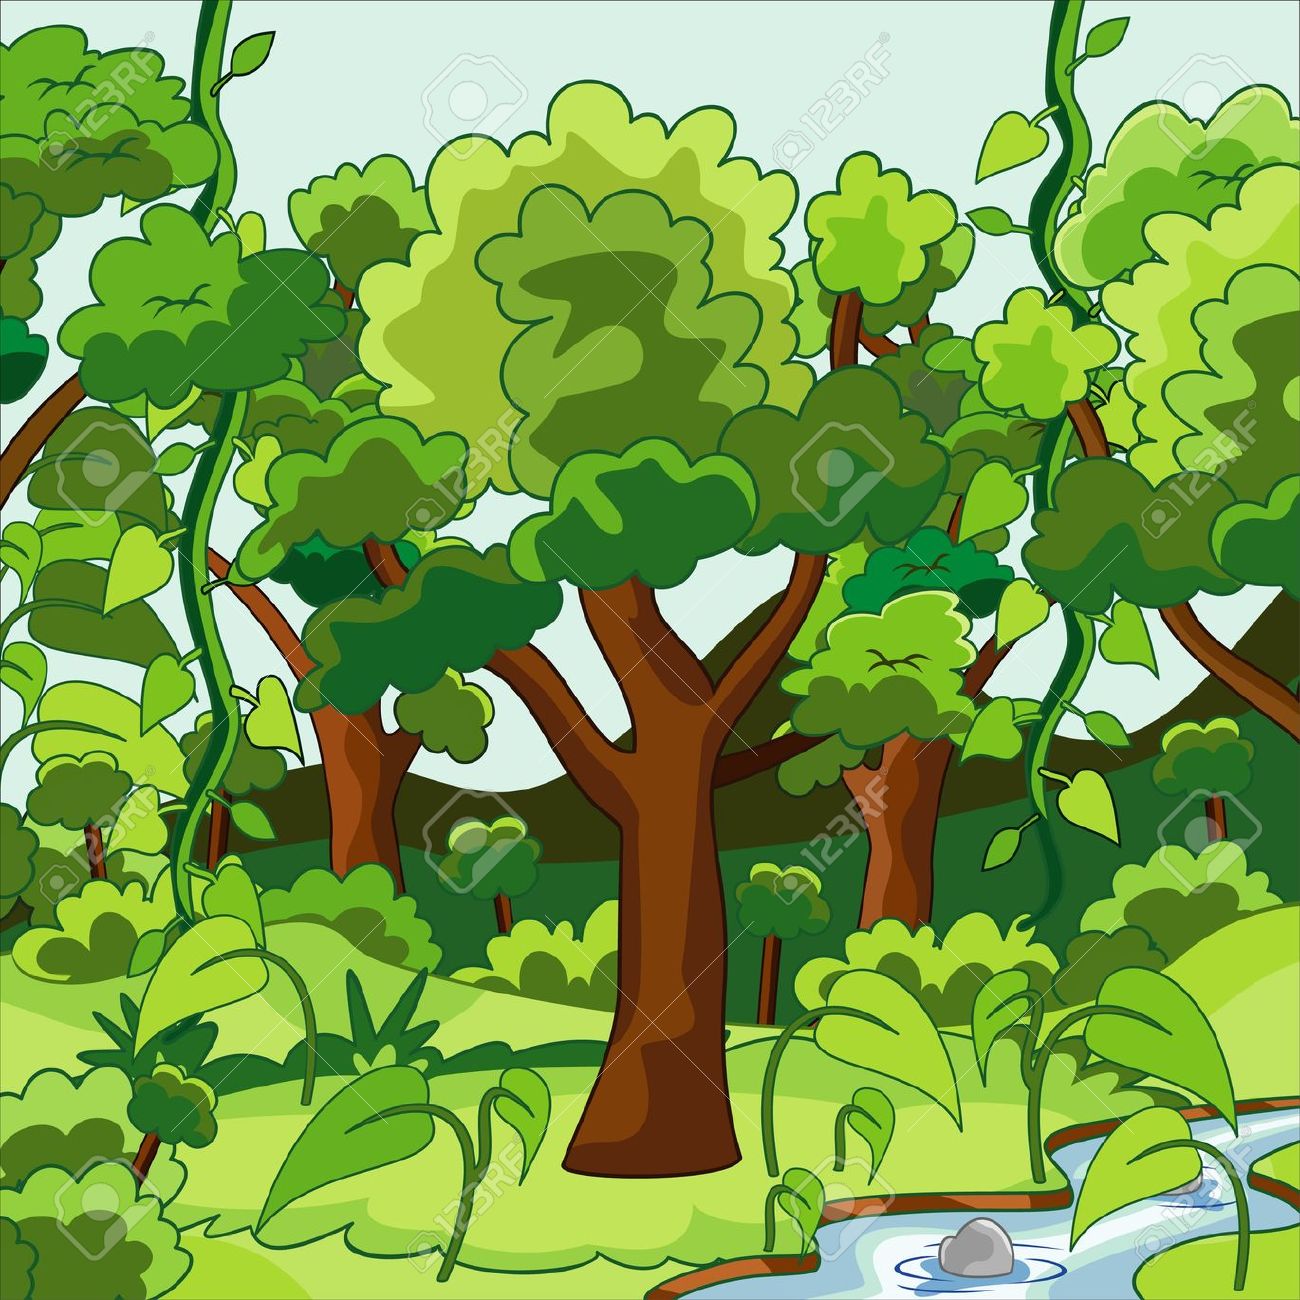 Clipart Images Of Jungle.